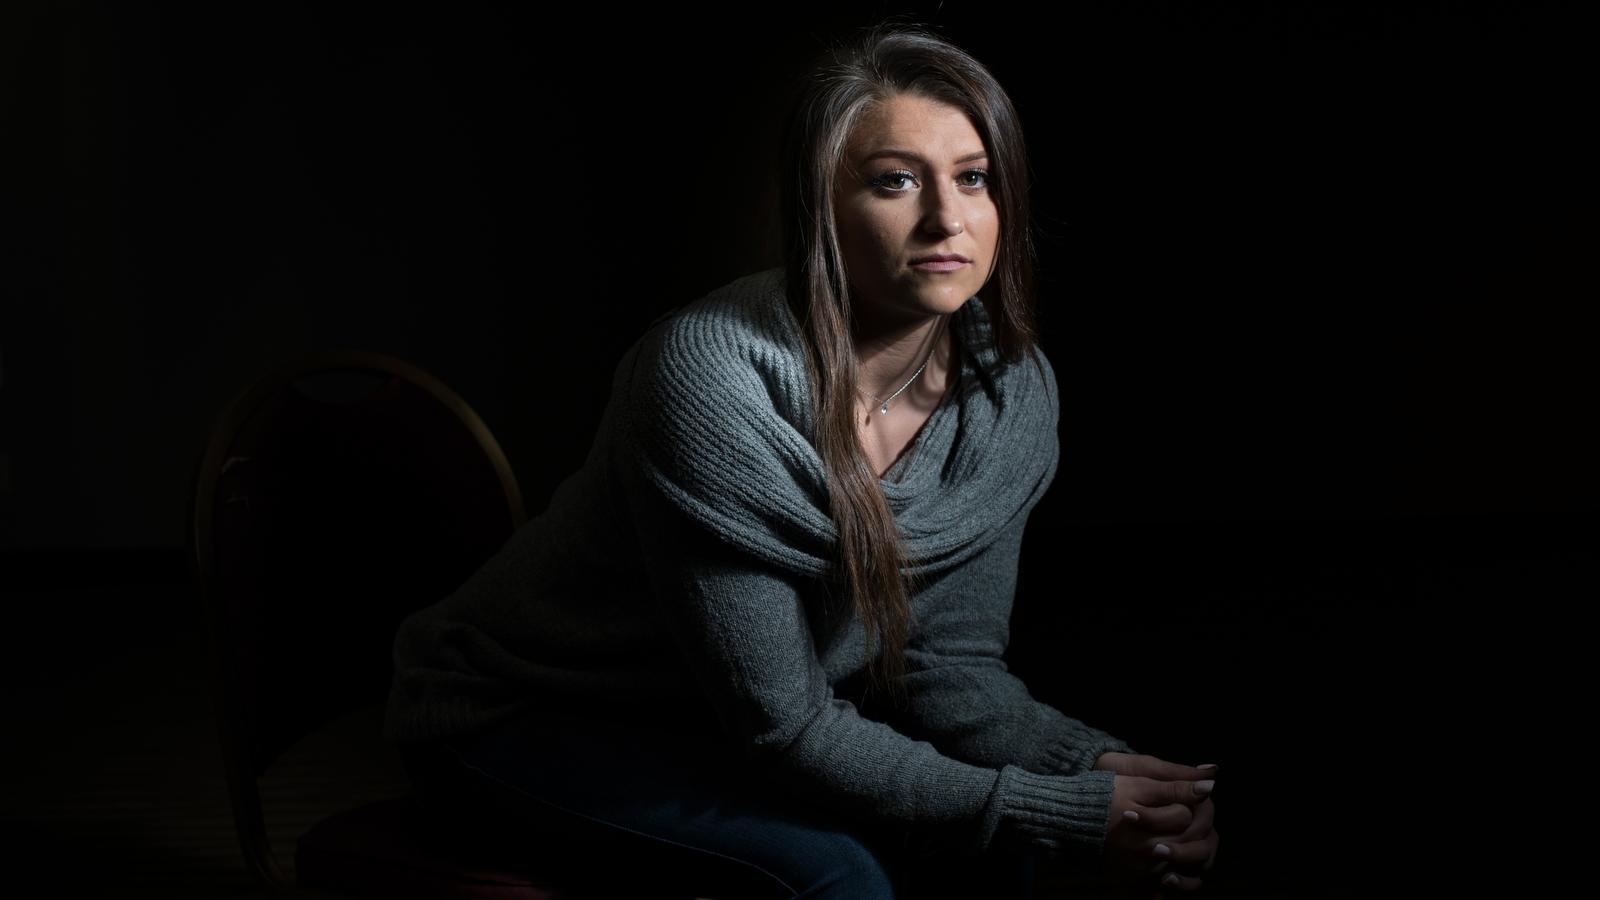 Lindsey Lemke, 22, was the first to speak out against John Geddert at Larry Nassar’s sentencing in January 2018. She said Geddert deserved to be in jail with Nassar. In the days that followed, at least three more gymnasts mentioned Geddert in their victim impact statements. Lindsey retired as a gymnast in October 2017 and is a student coach for Michigan State University’s gymnastics team. 